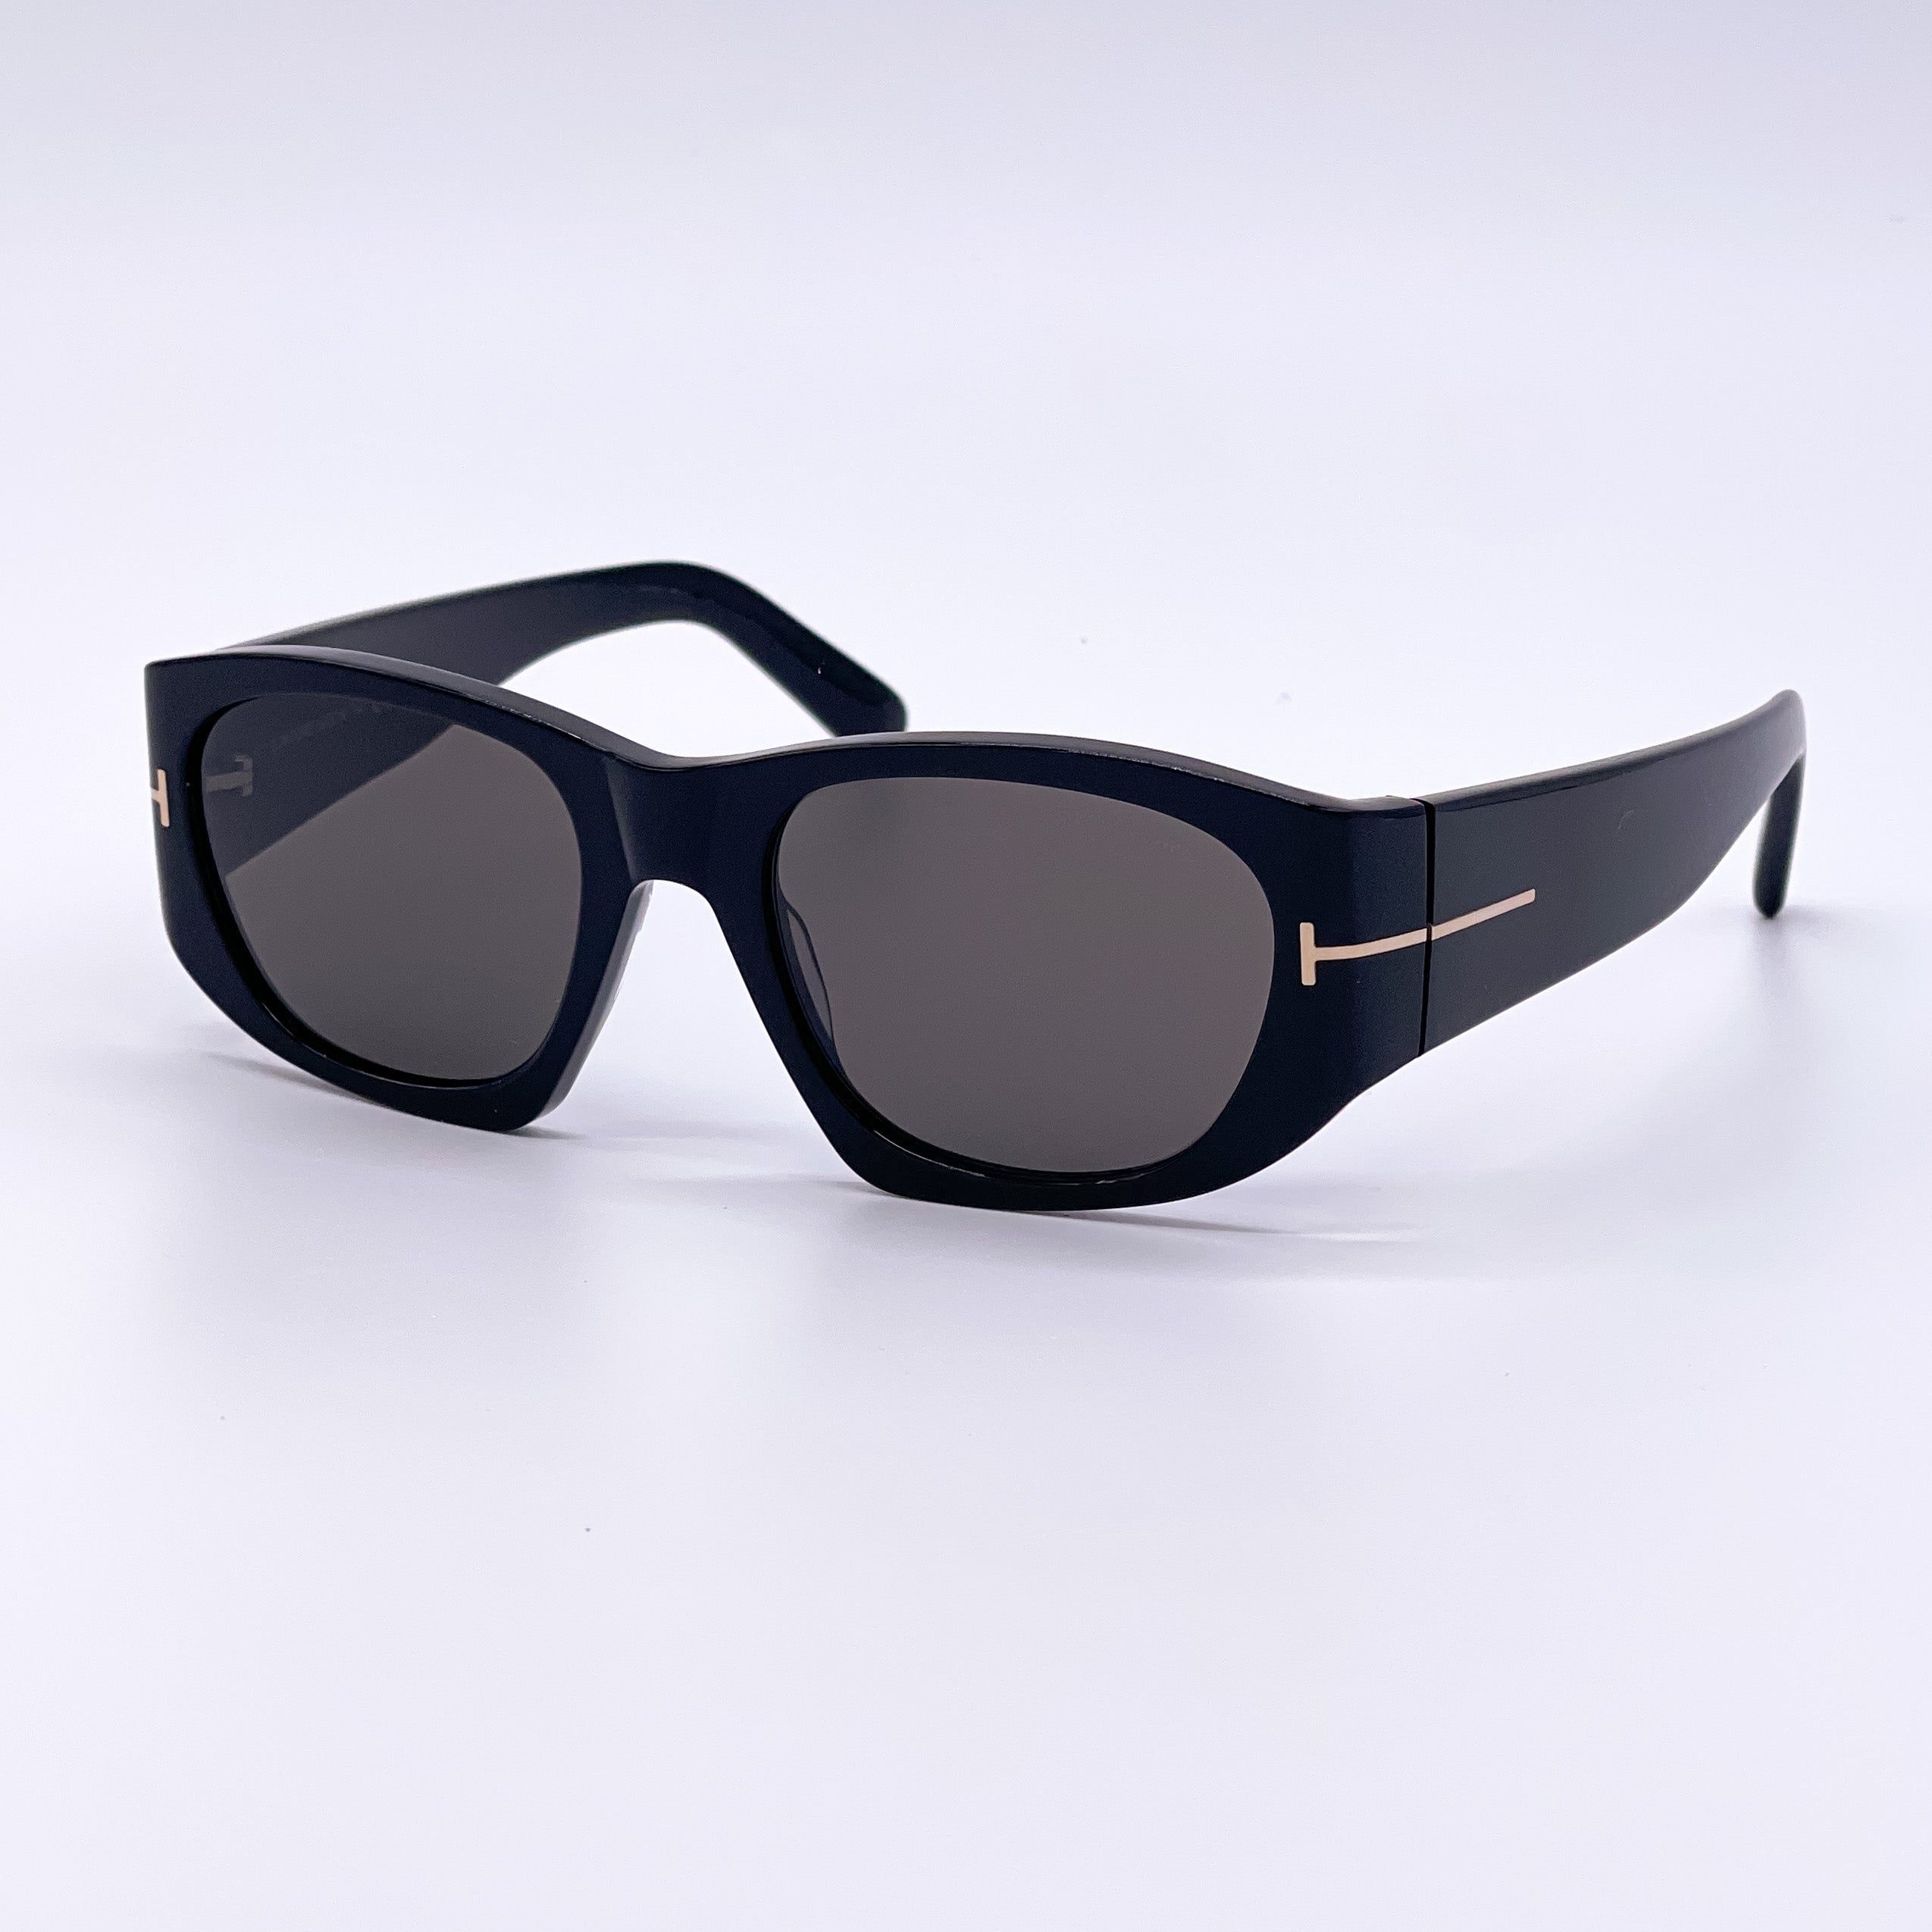 TOM FORD CYRILLE-02 TF987 01A SUNGLASSES FT0987/S